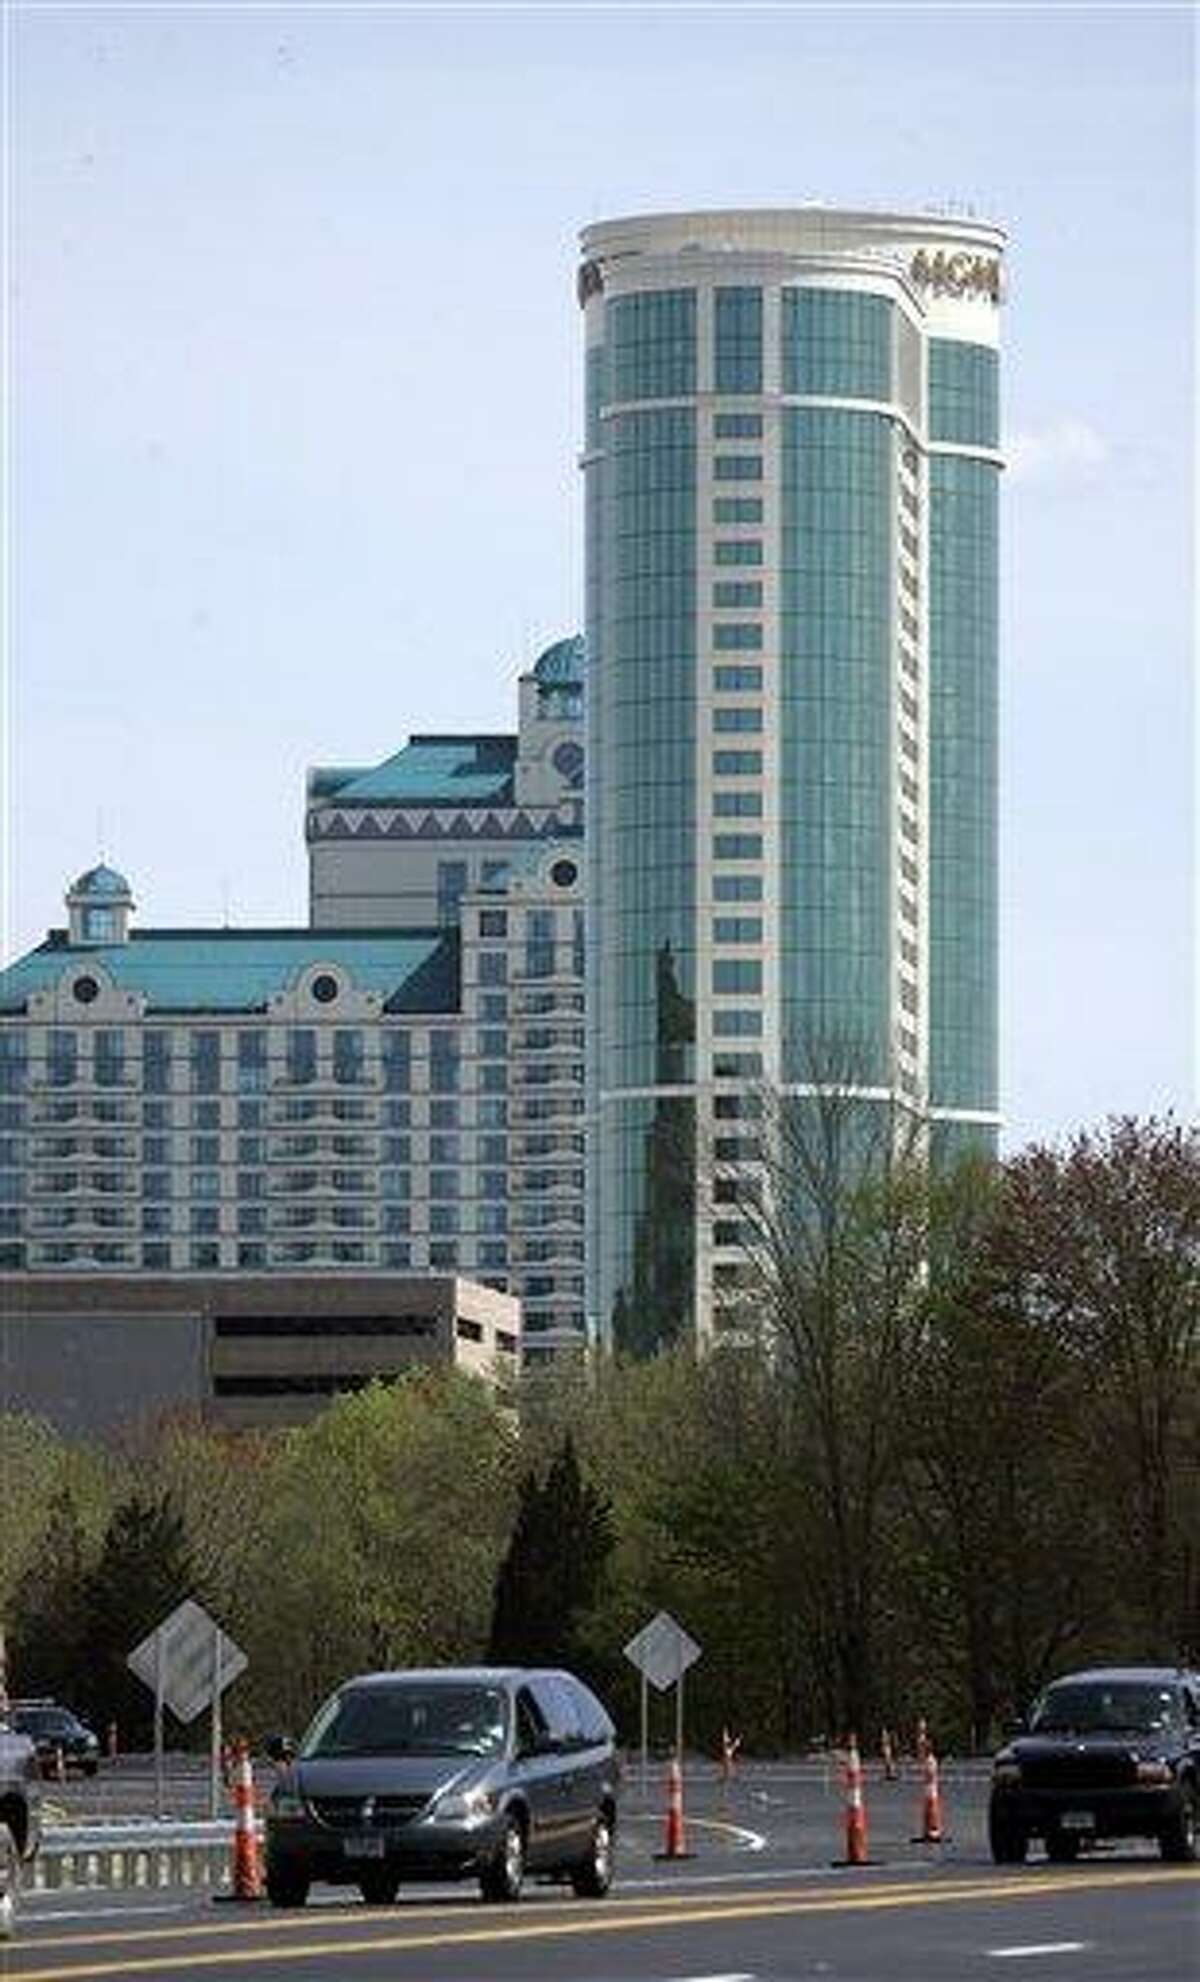 The MGM Grand Hotel, part of the Foxwoods Resort Casino, dominates the skyline in Mashantucket. Associated Press file photo